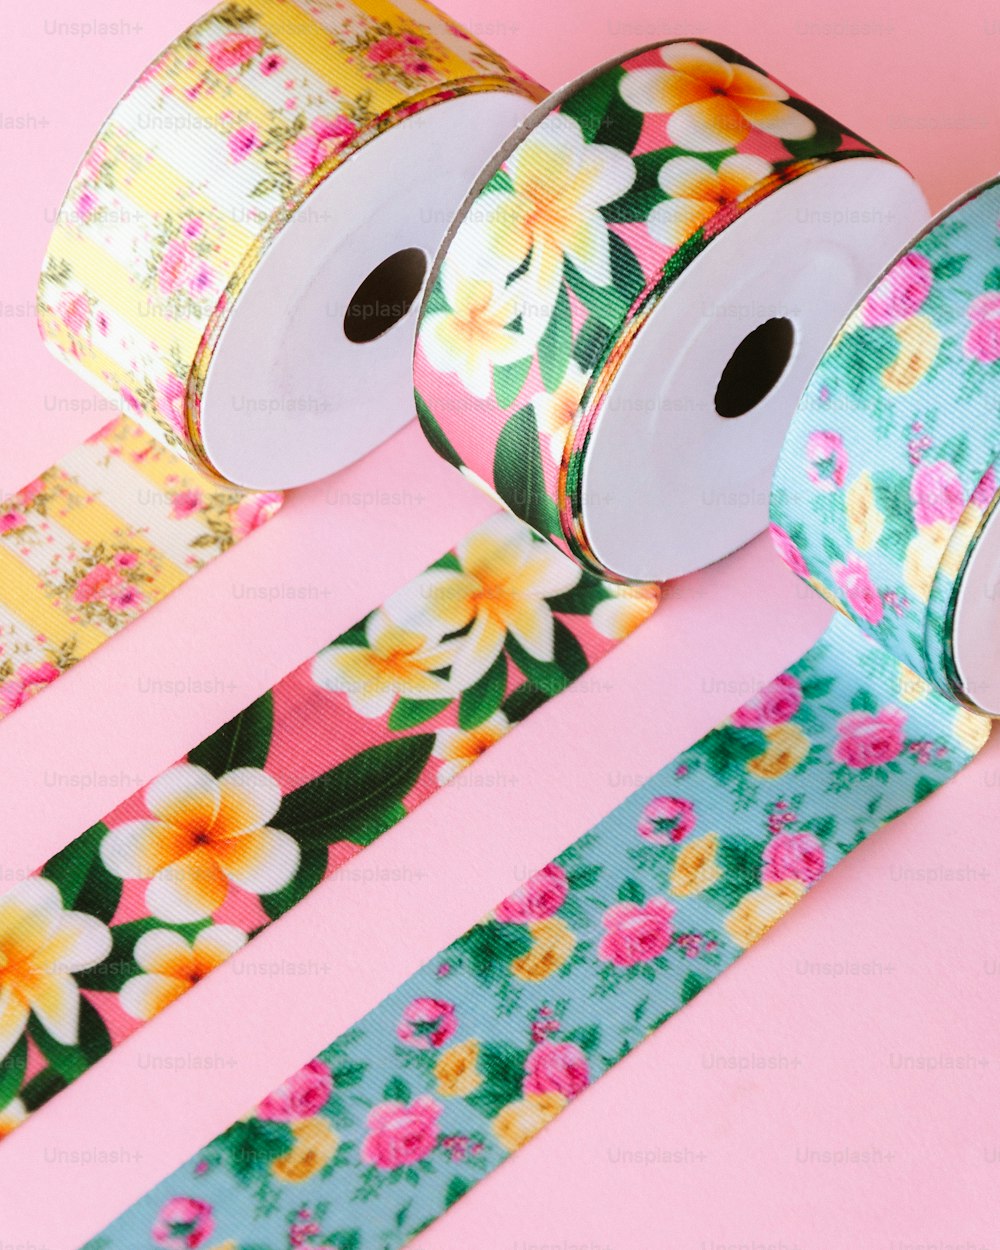 three rolls of colorful floral washi tape on a pink background